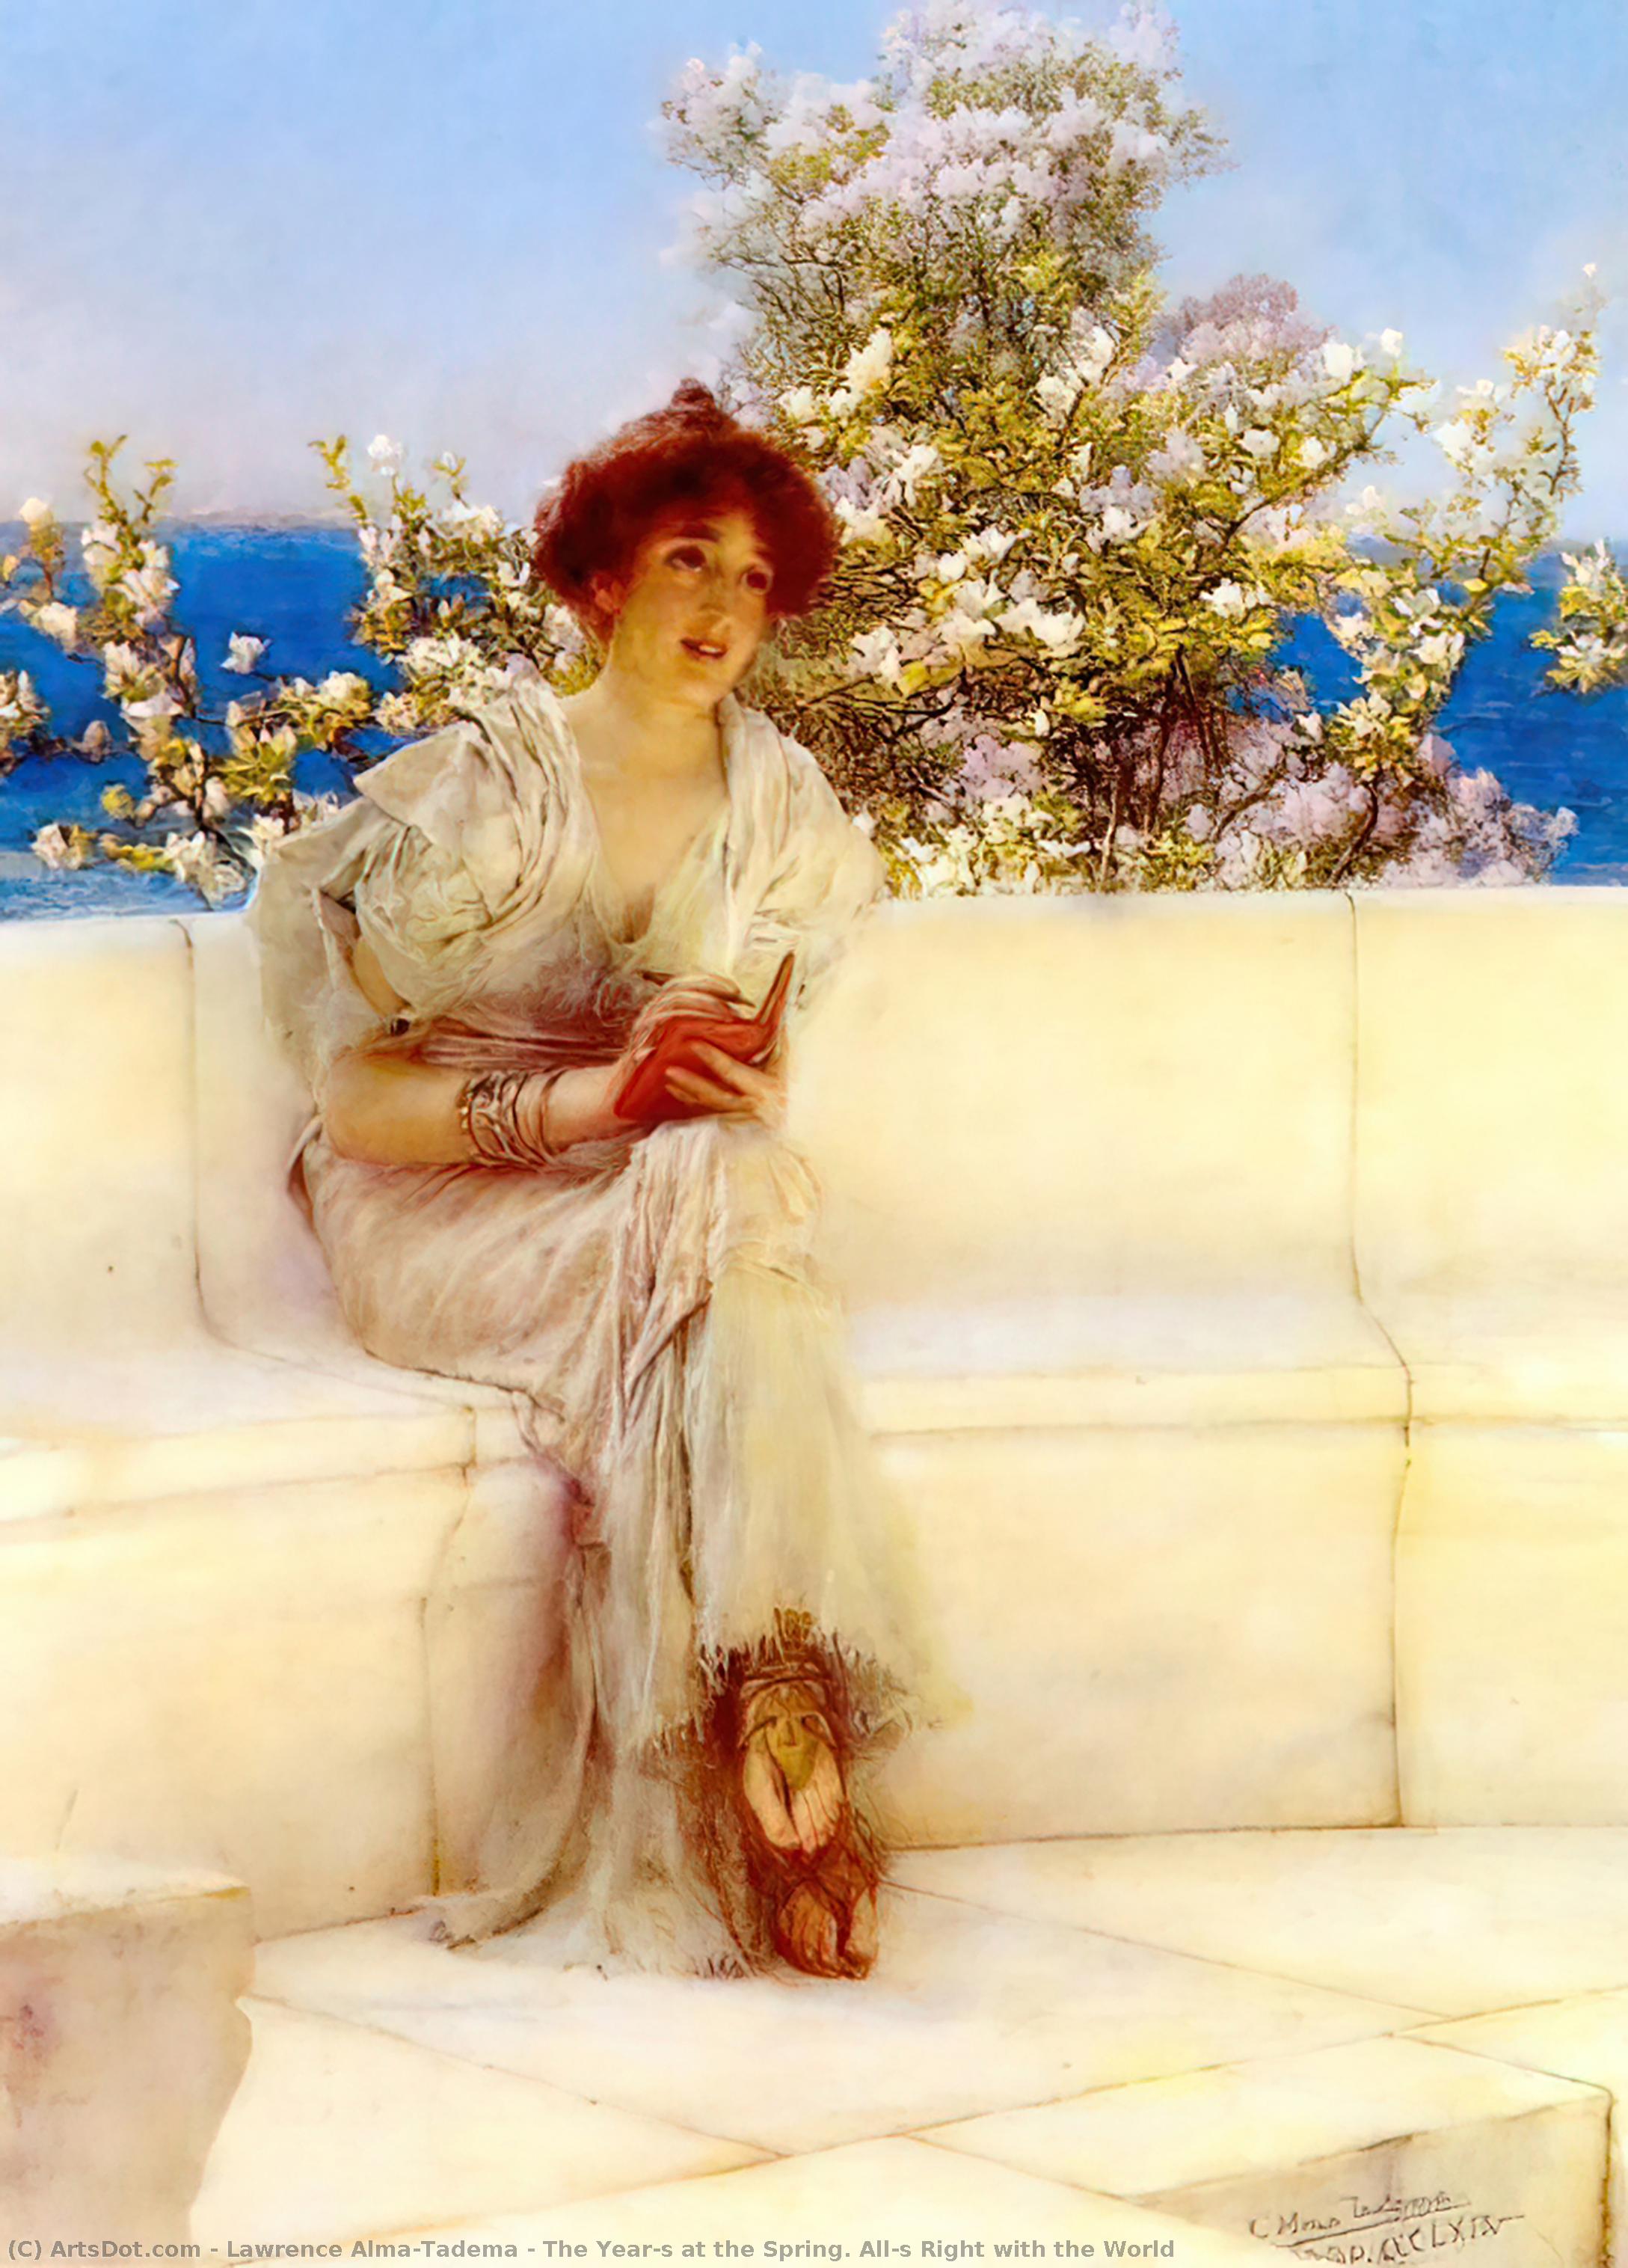 WikiOO.org - Güzel Sanatlar Ansiklopedisi - Resim, Resimler Lawrence Alma-Tadema - The Year's at the Spring. All's Right with the World